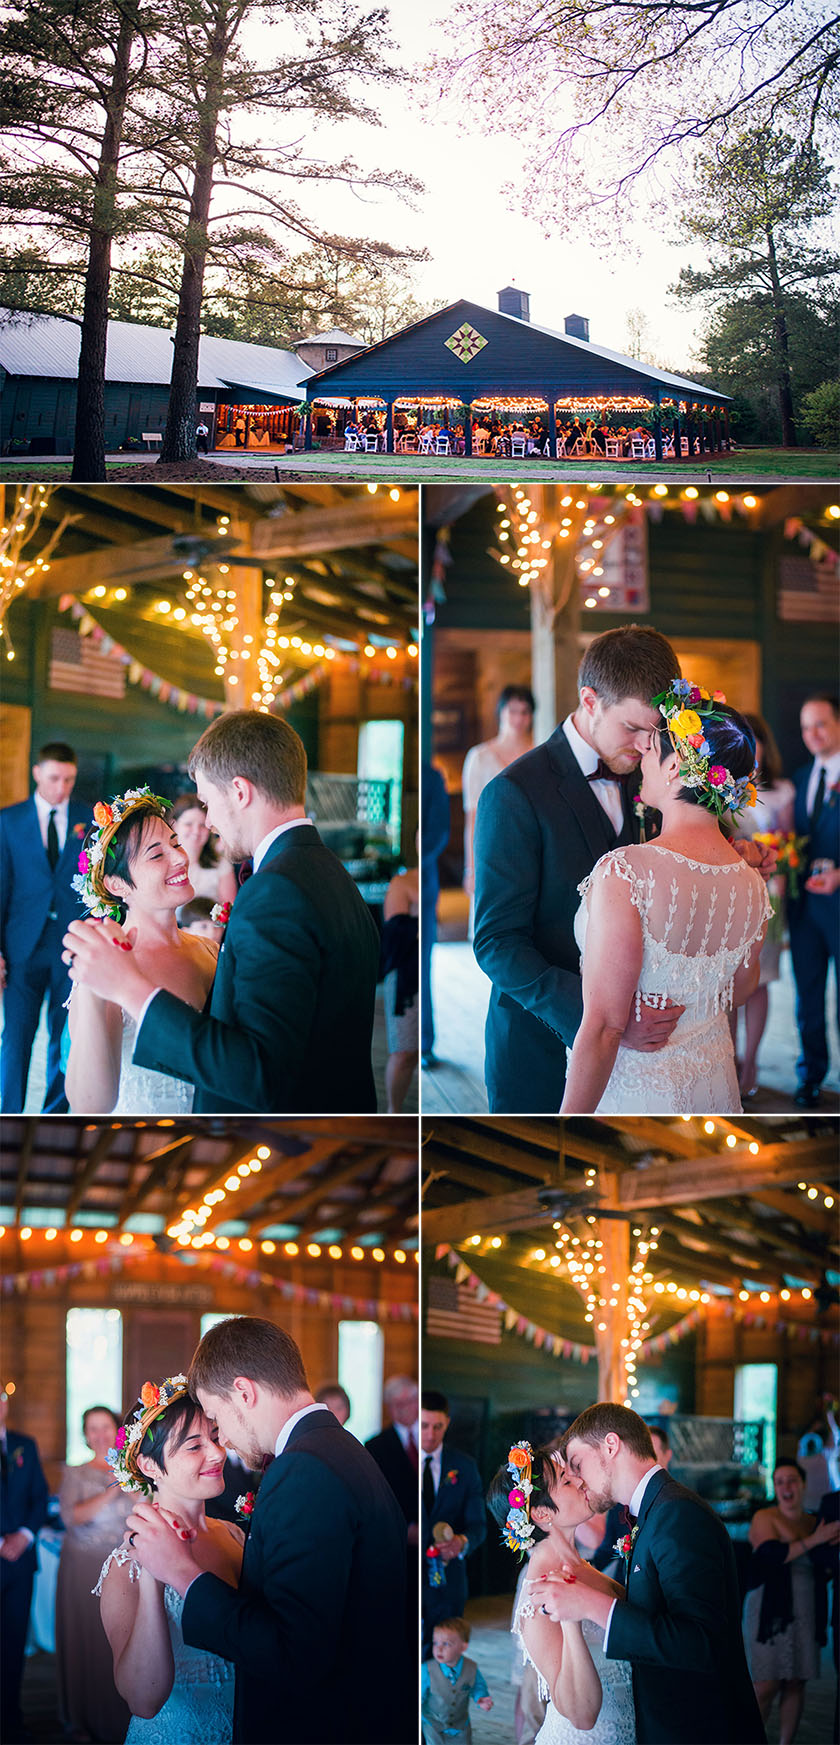 Connection_Photography_Raleigh_Wedding_43